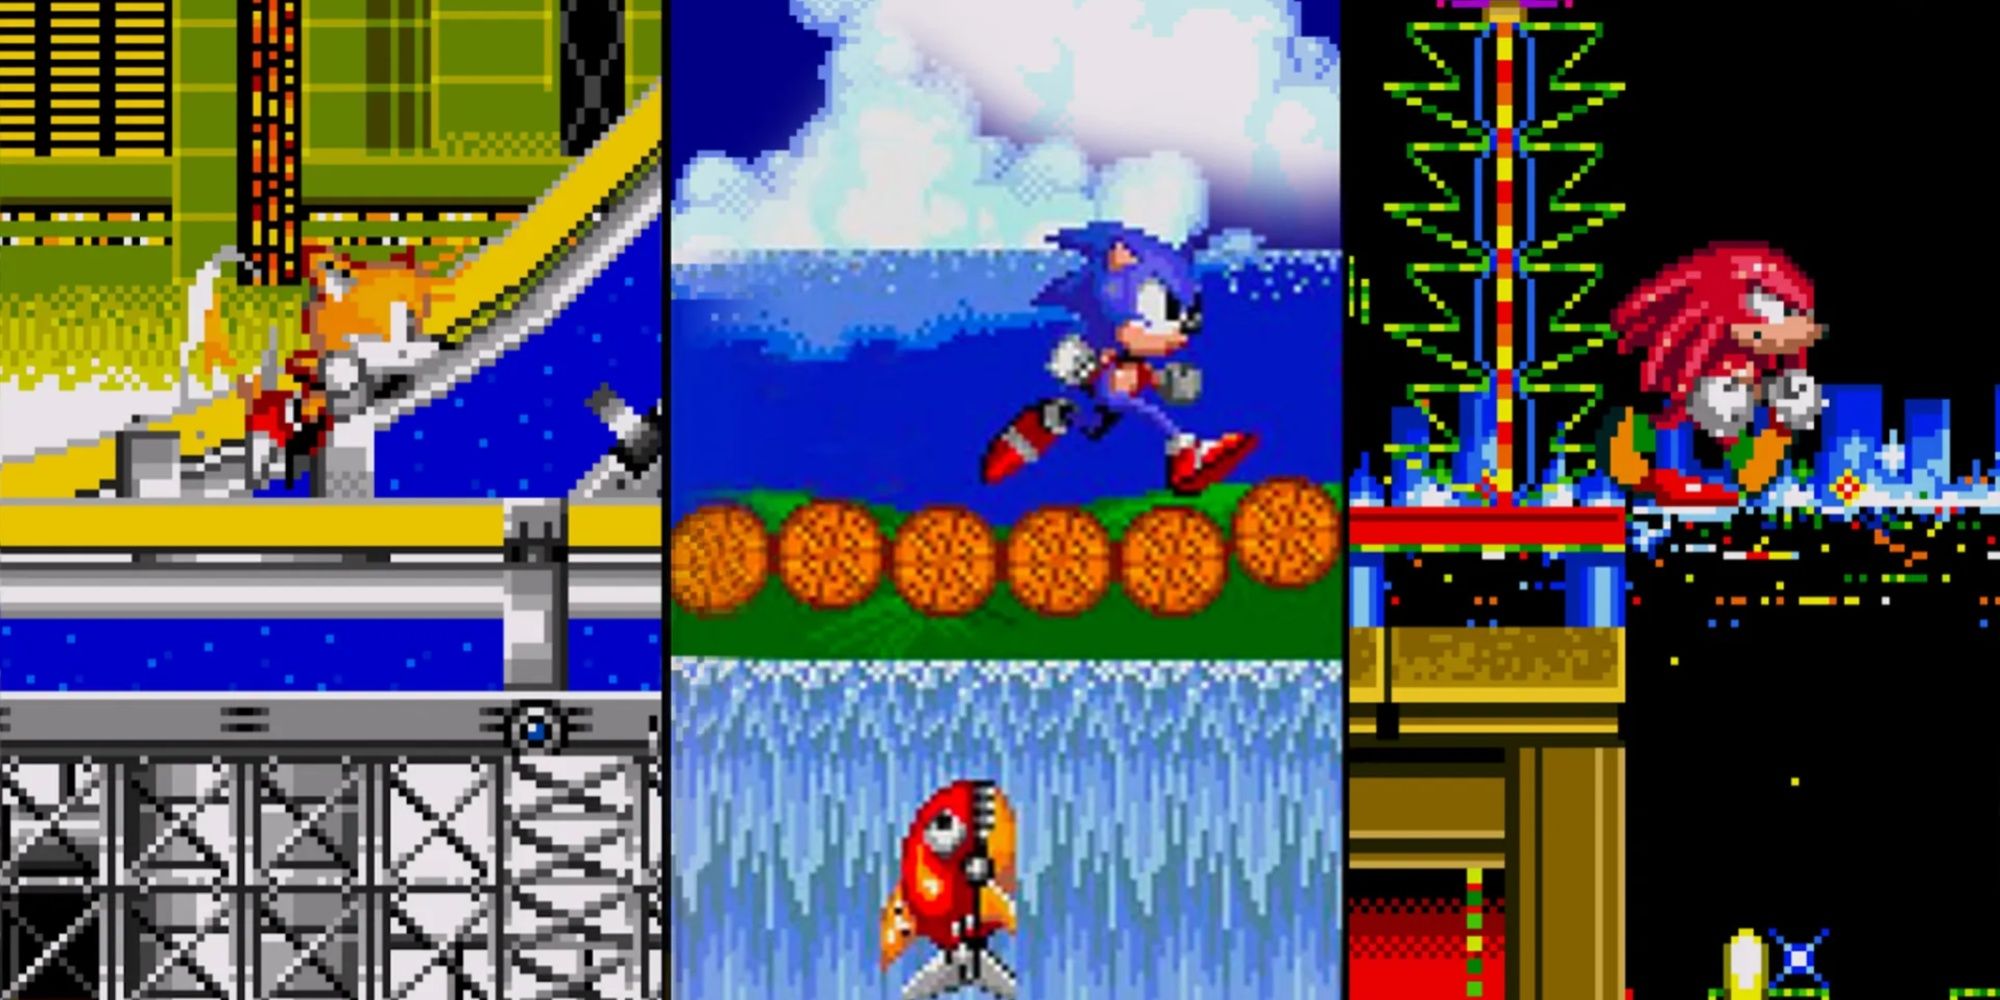 sonic tails and knuckles running through different levels in sonic 2